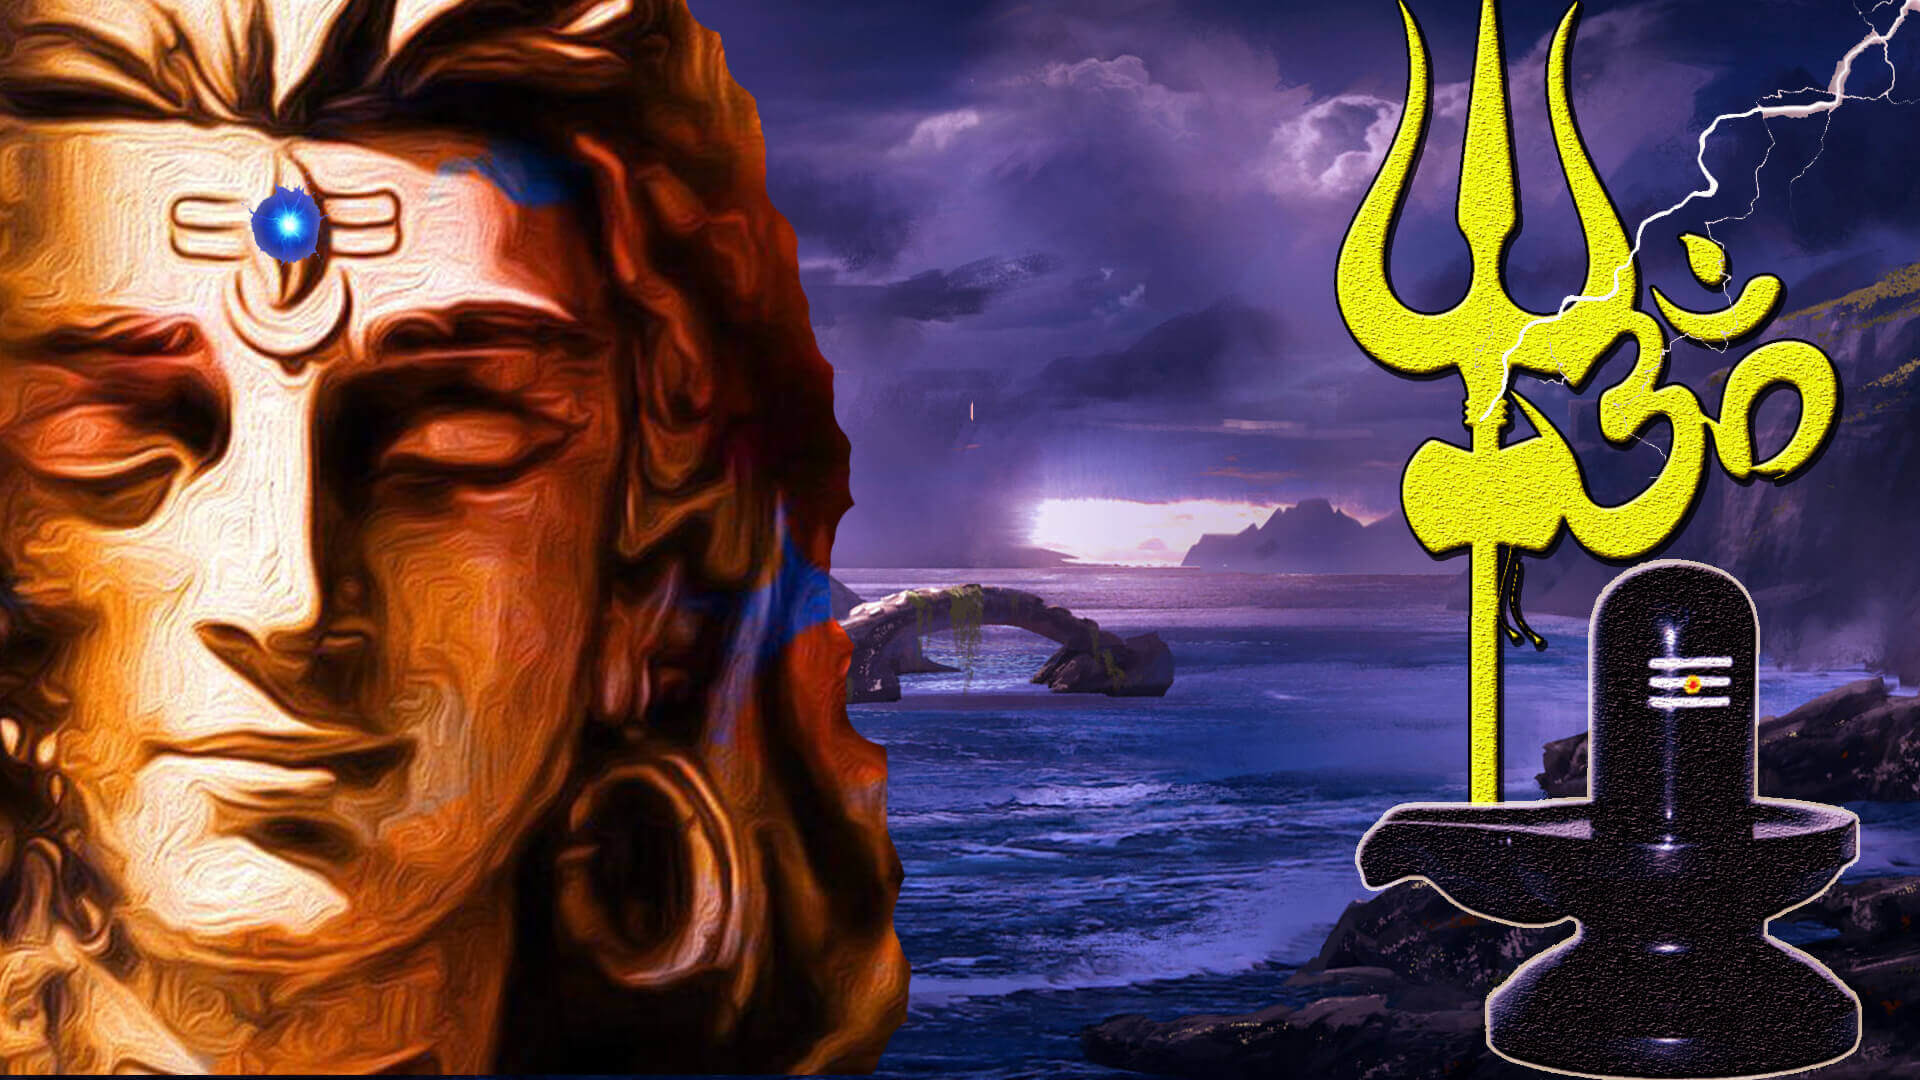 Lord Shiva Wallpapers HD (71+ images)